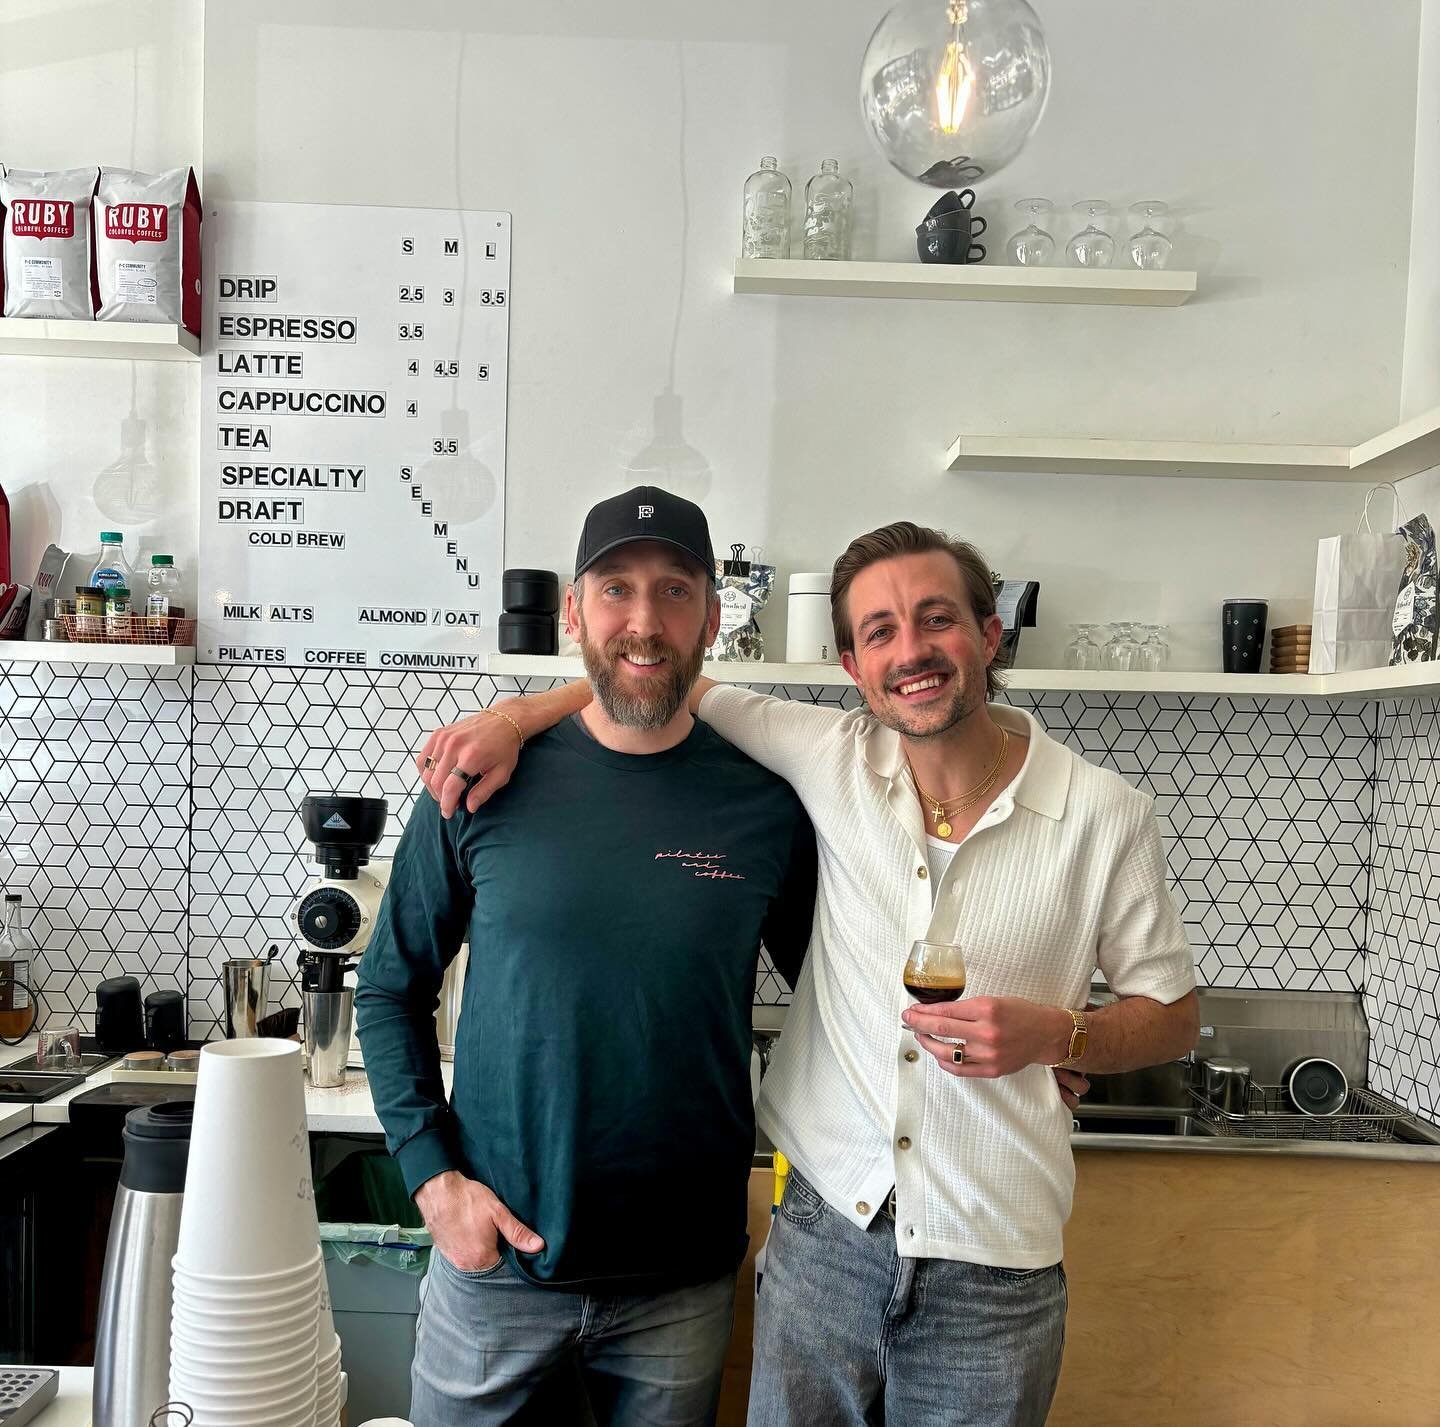 When we founded P+C in 2017, Ryan had exactly 0 days of service / coffee experience. Probably not the best resume to launch a specialty shop. We needed help.
&bull;
Enter @harrisnash - who gave up so much time and energy into turning our vision into 